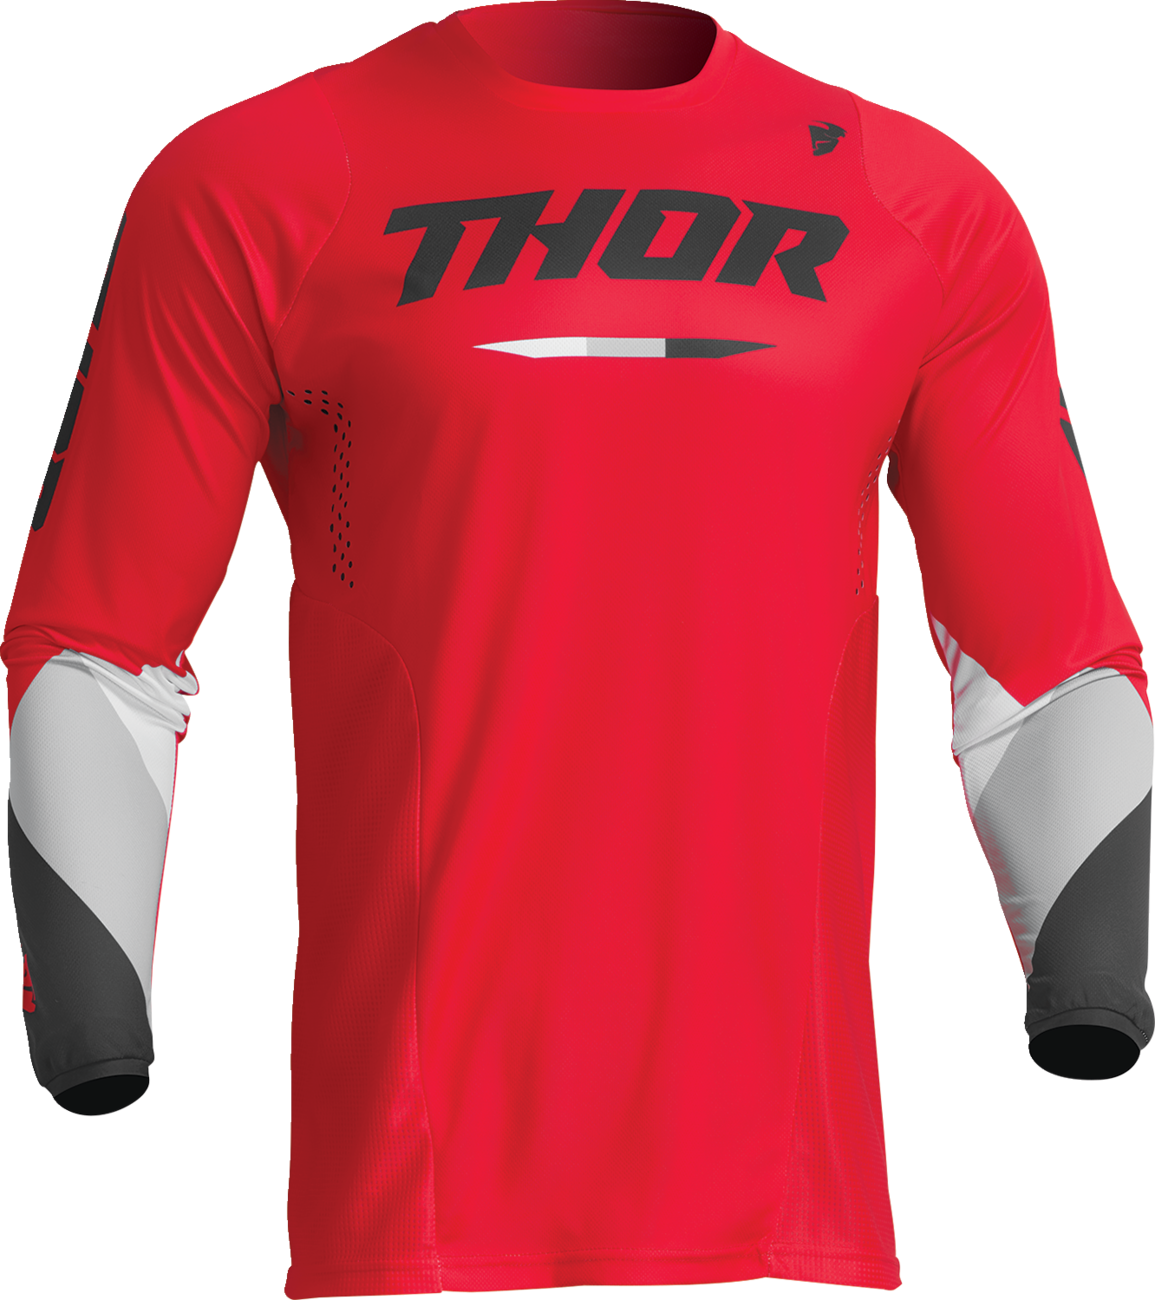 THOR Youth Pulse Tactic Jersey - Red - Small 2912-2205